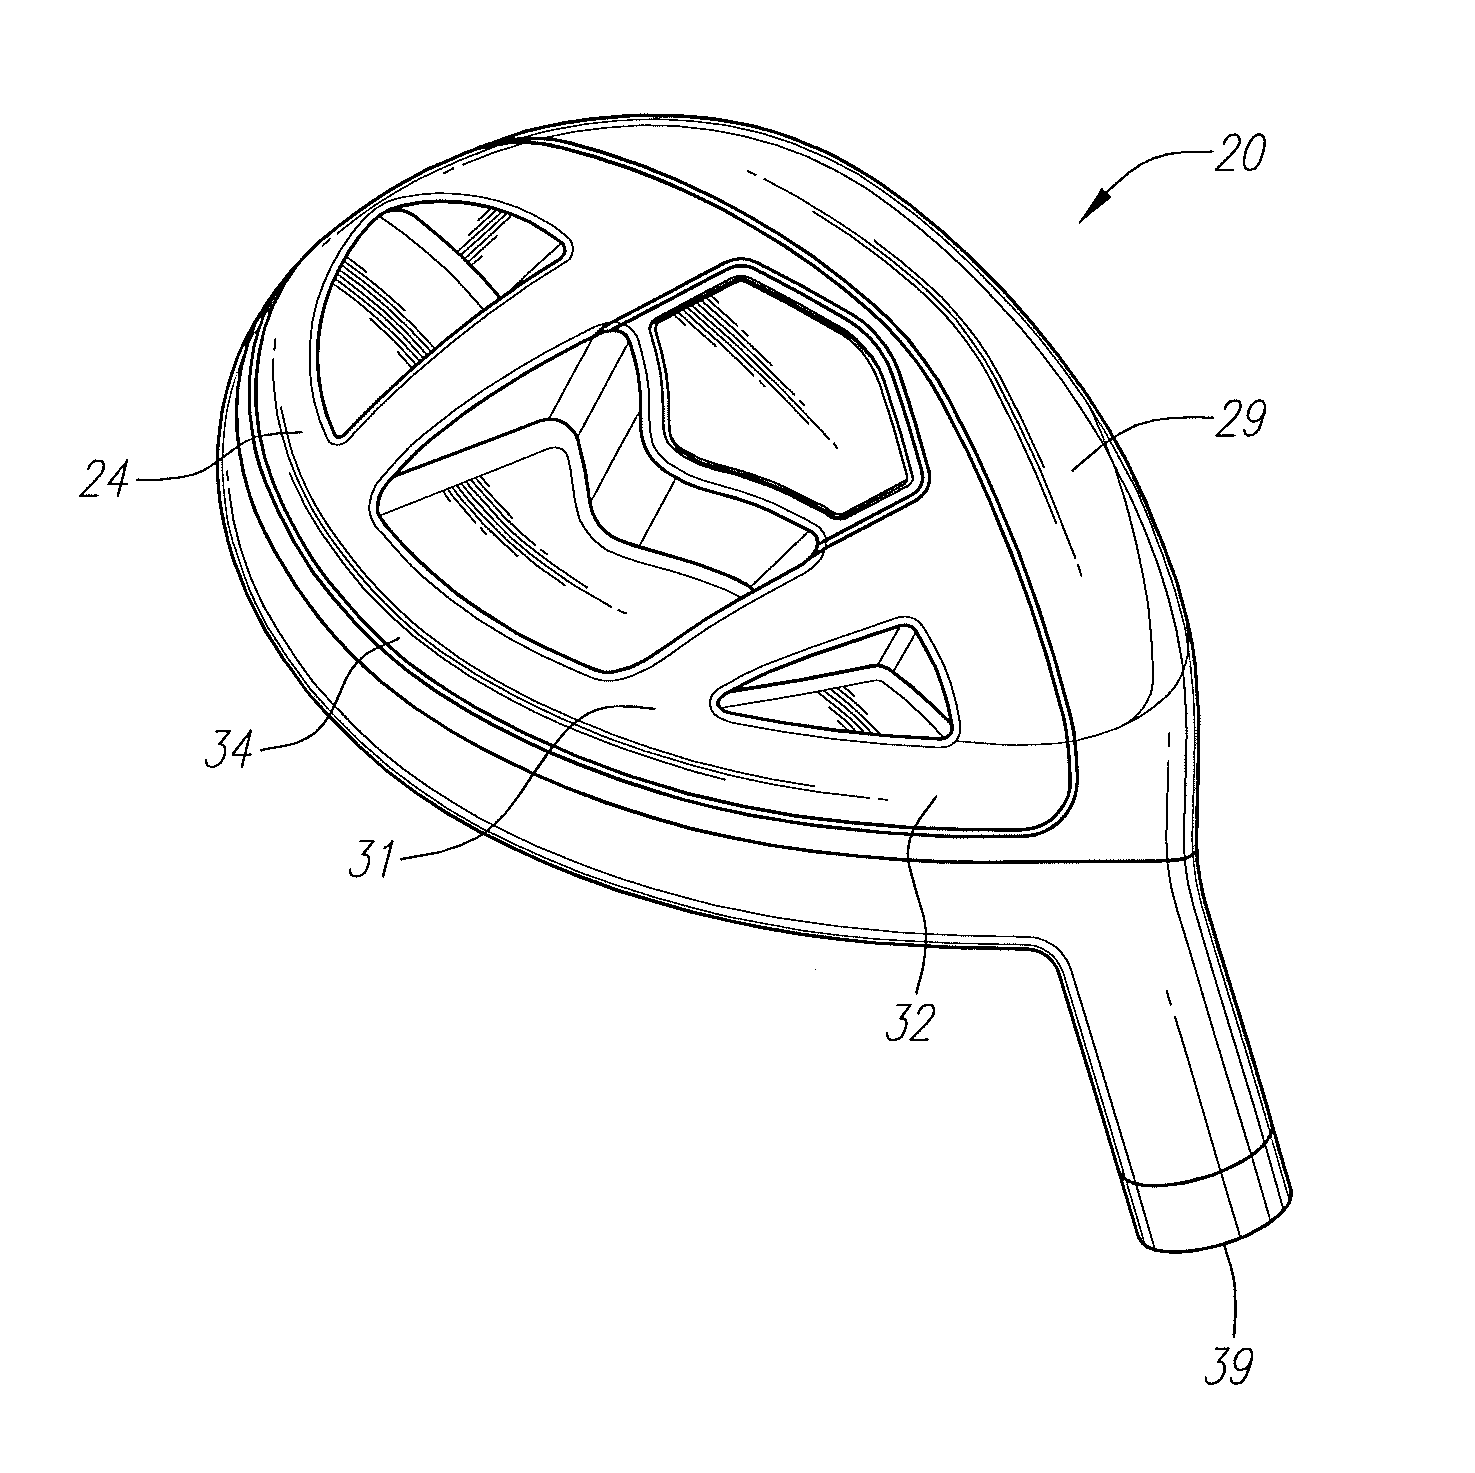 Golf club head with tungsten alloy sole component